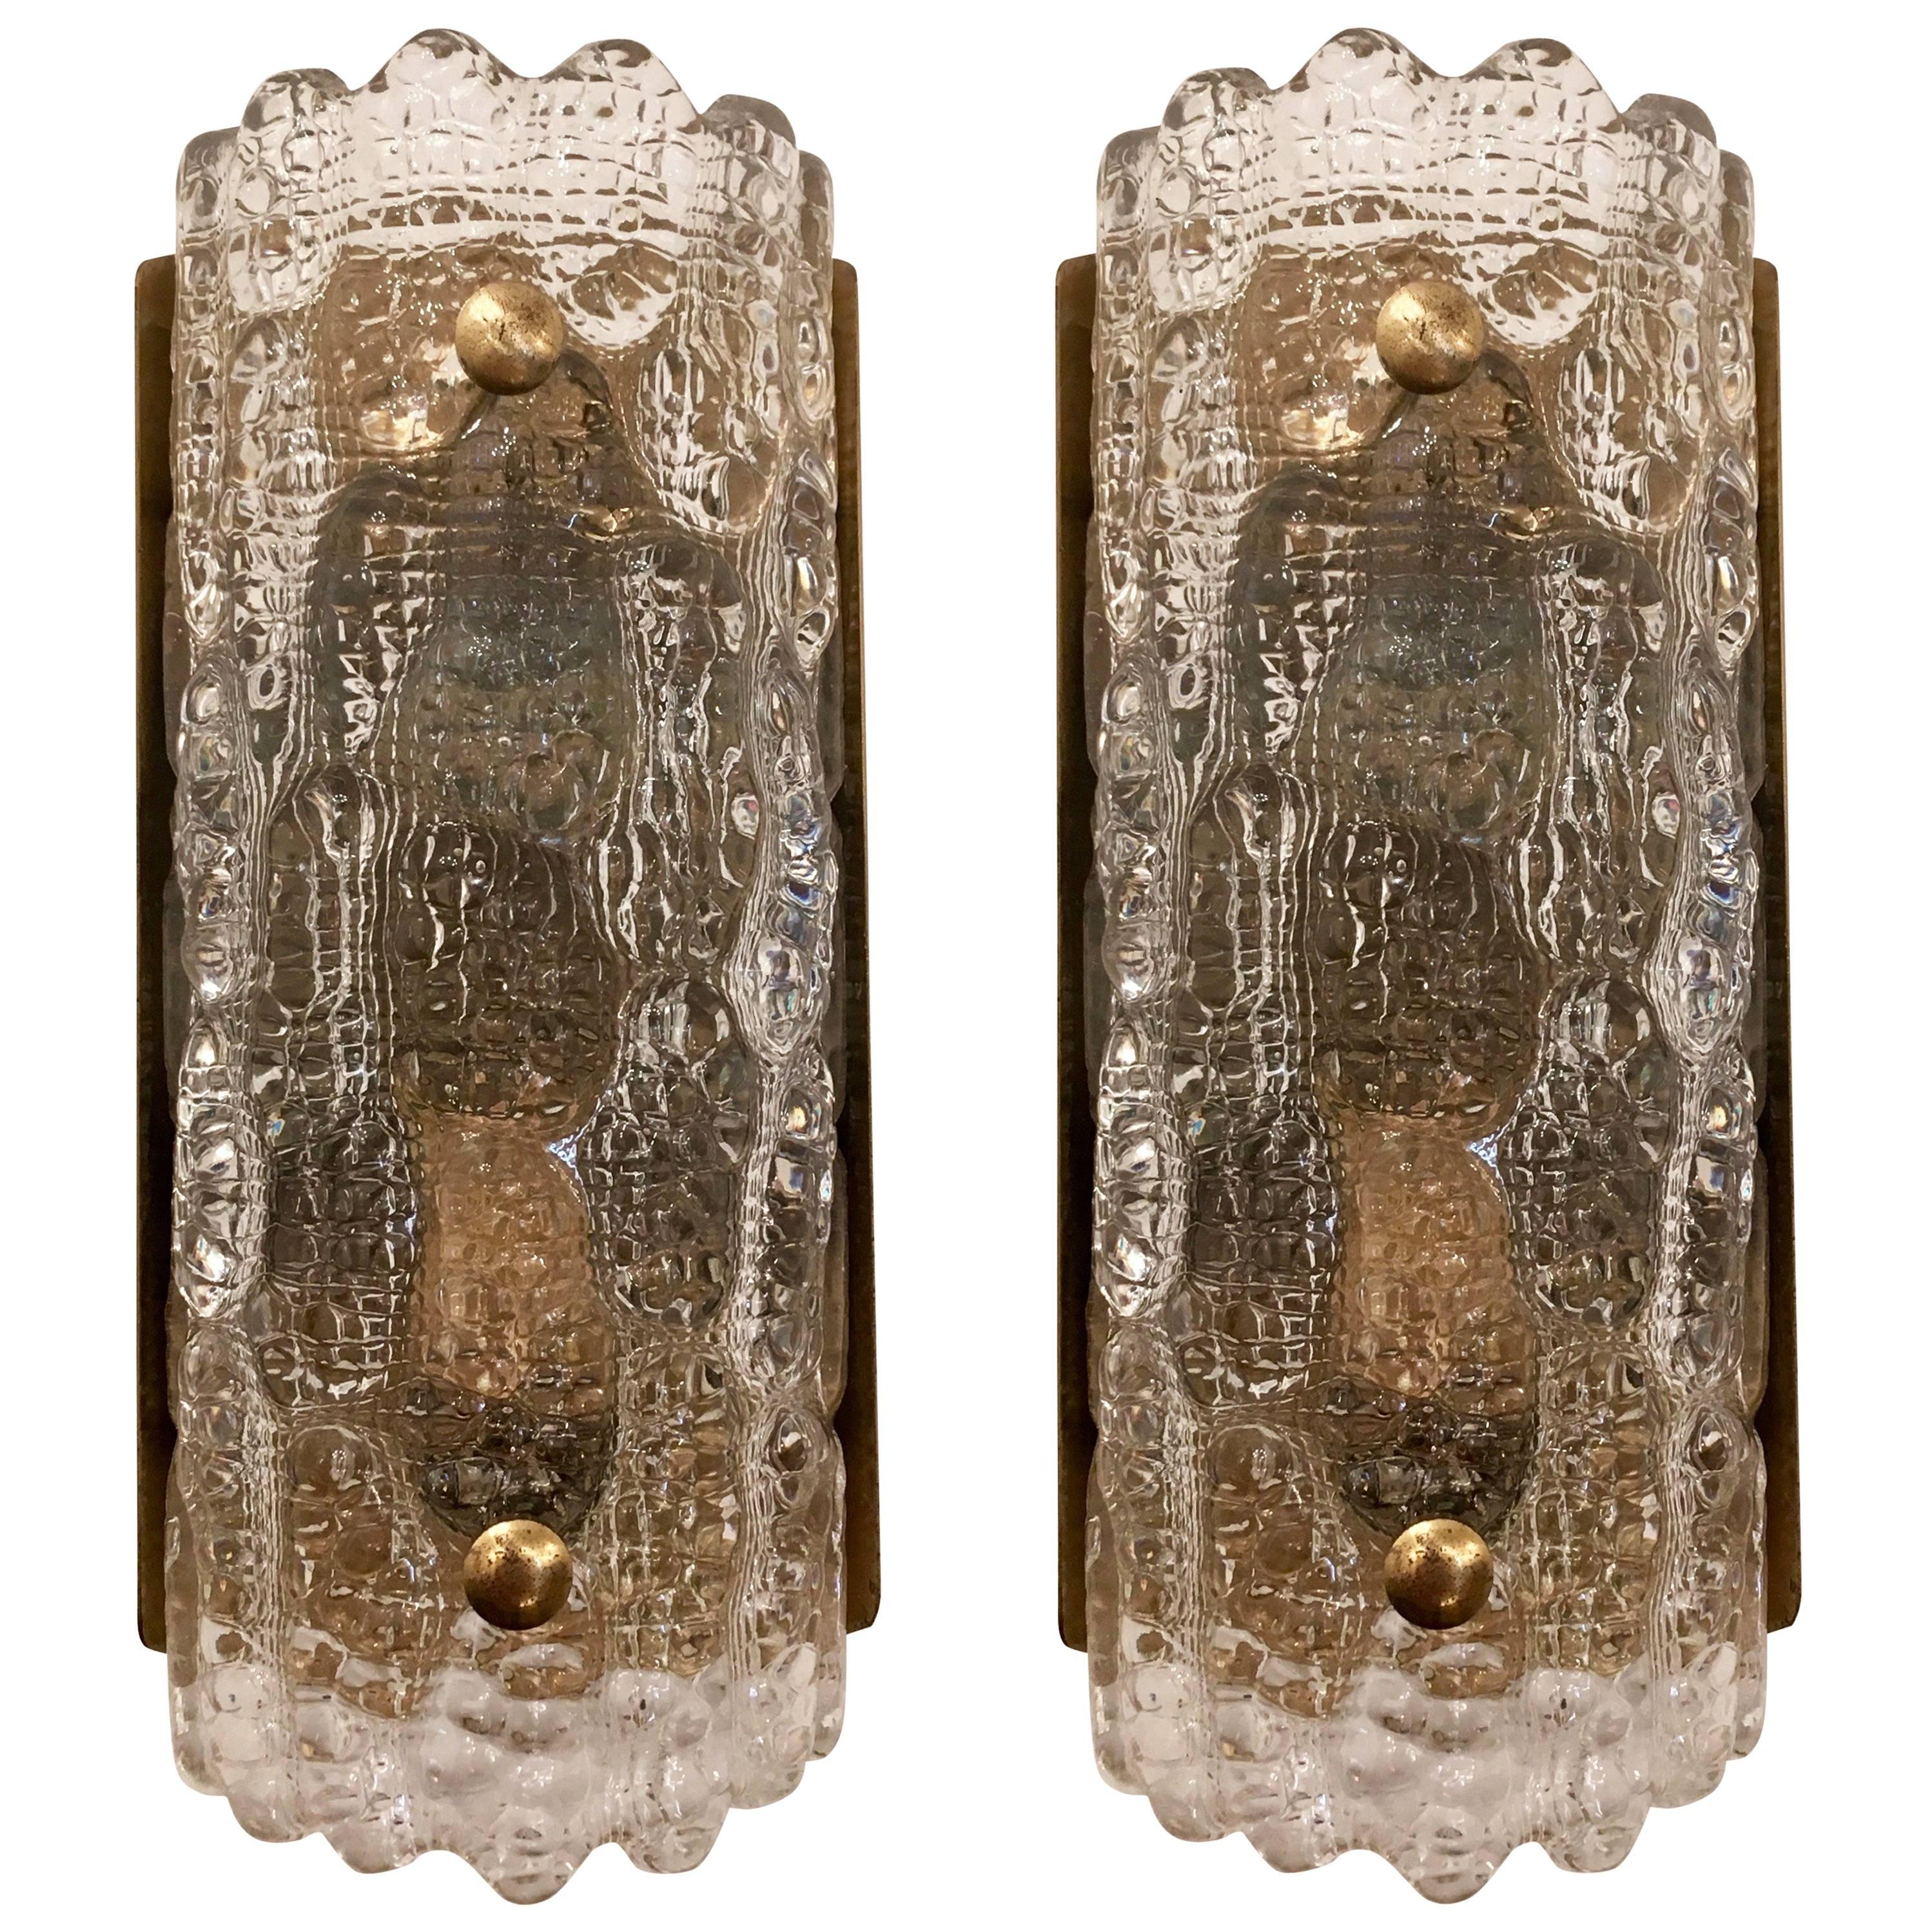 Pair of Orrefors Fagerlund Swedish Glass, 1950s Wall Lights